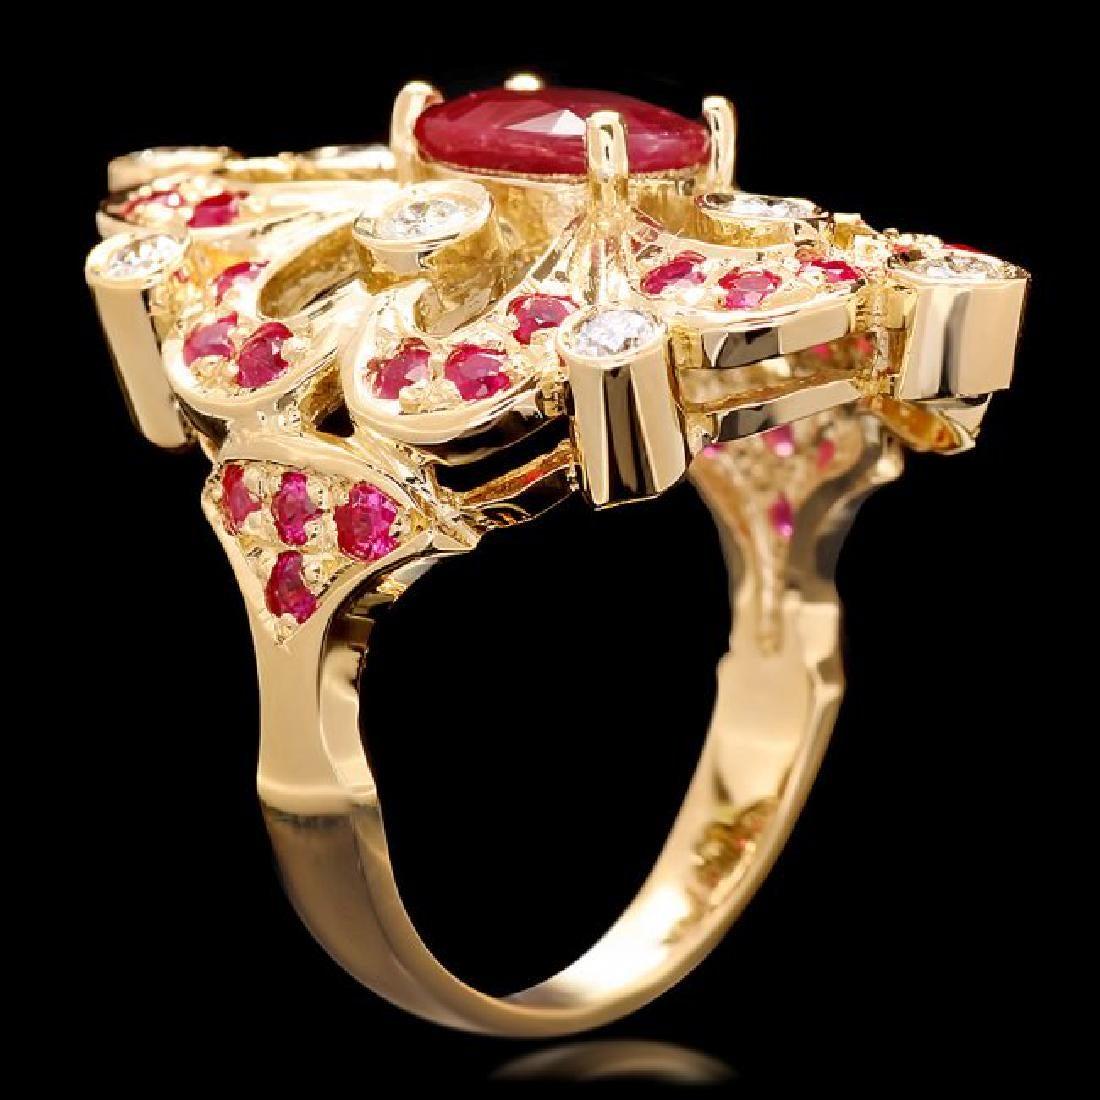 14K Yellow Gold 2.12ct Ruby and 0.48ct Diamond Ring